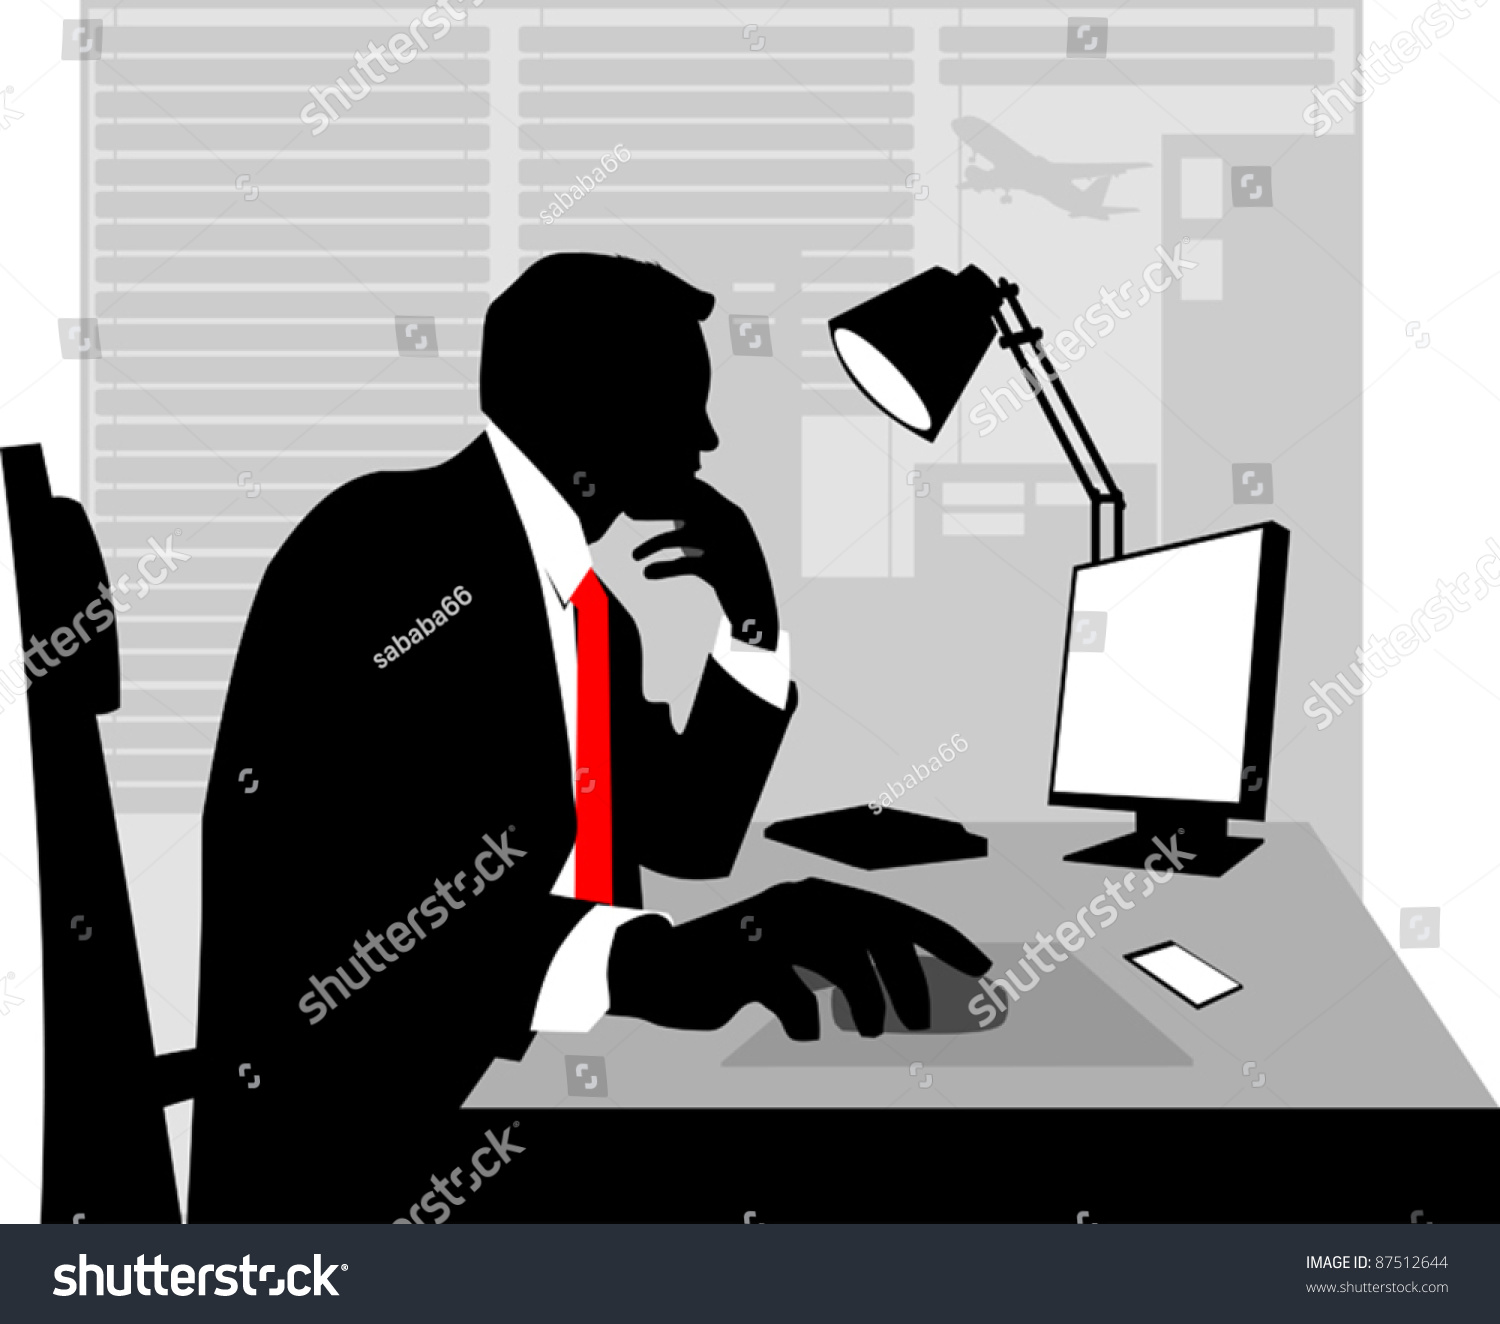 clipart of worker at desk - photo #32